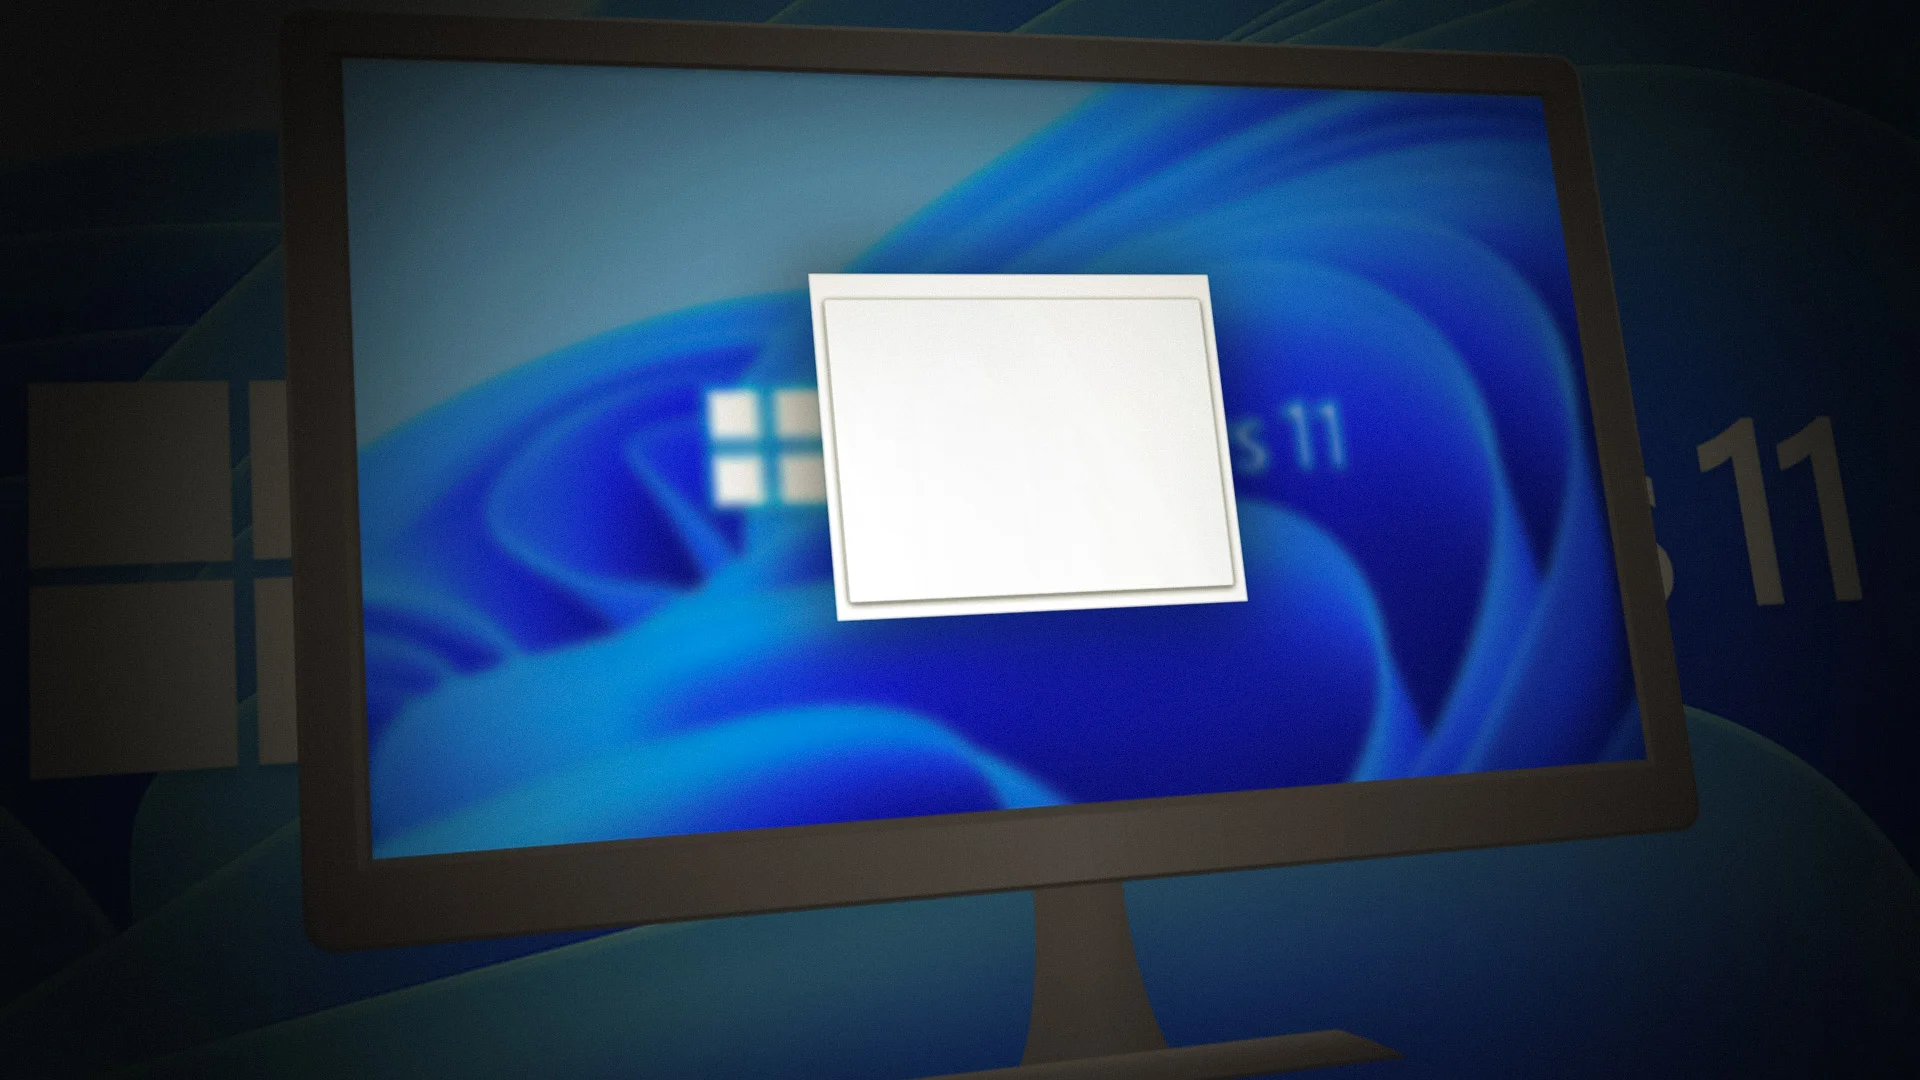 Translucent Box on the Screen in Windows 11? Try these Fixes